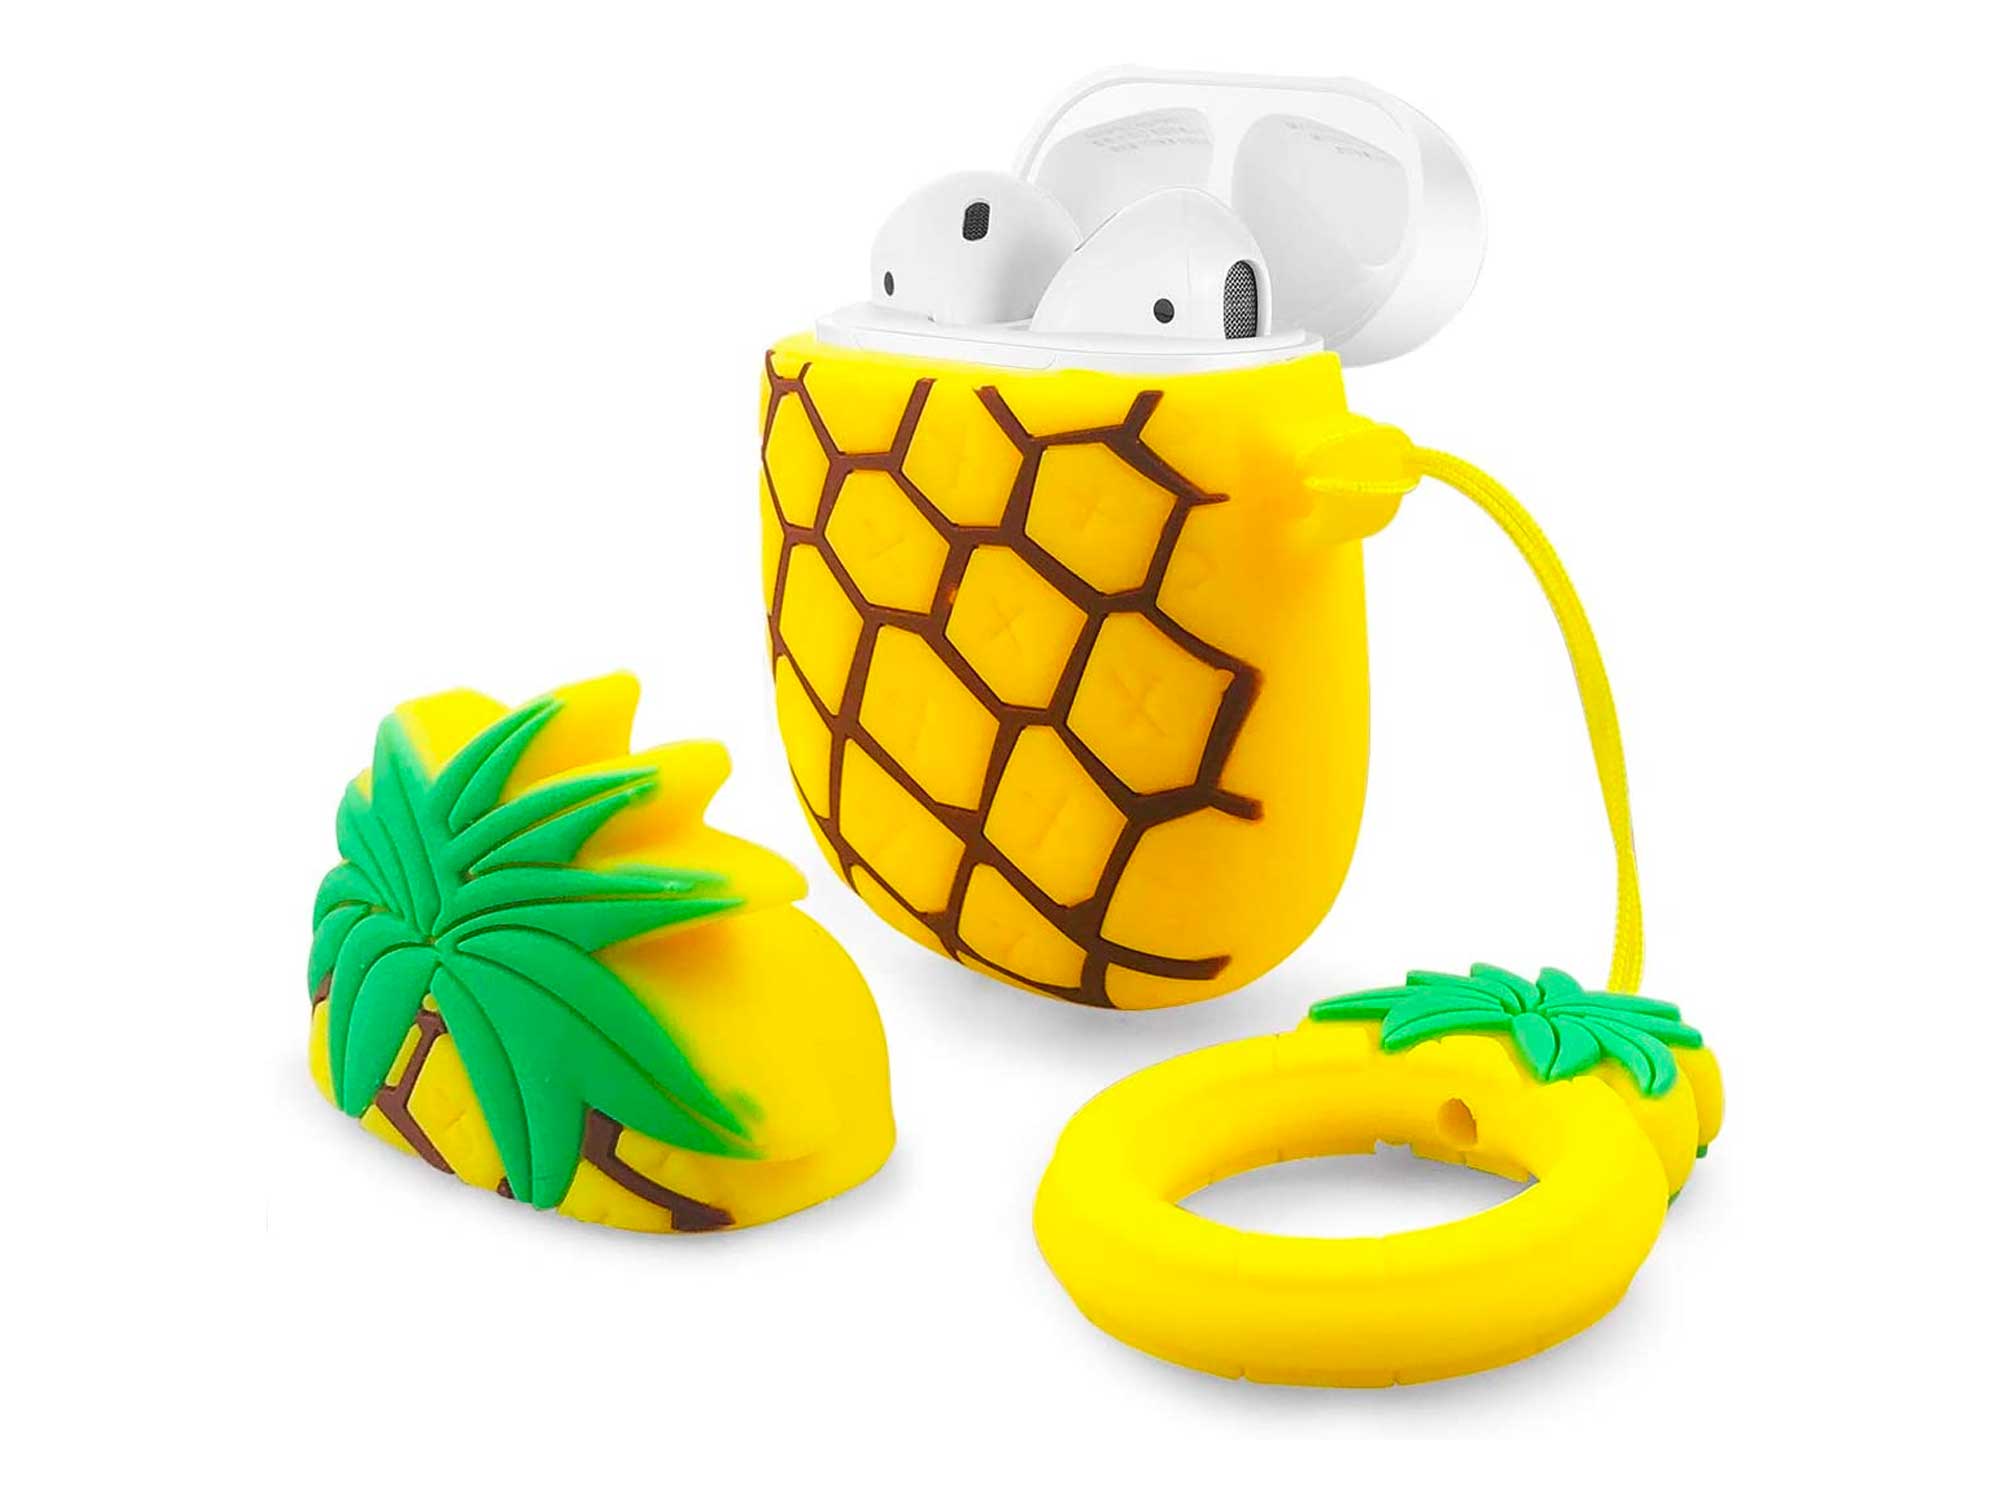 YDY Airpods Case AirPods Accessories Shockproof Portable & Protective Silicone Cover and Skin with Carabiner for Apple Airpods Charging Case - Pineapple (Pineapple)